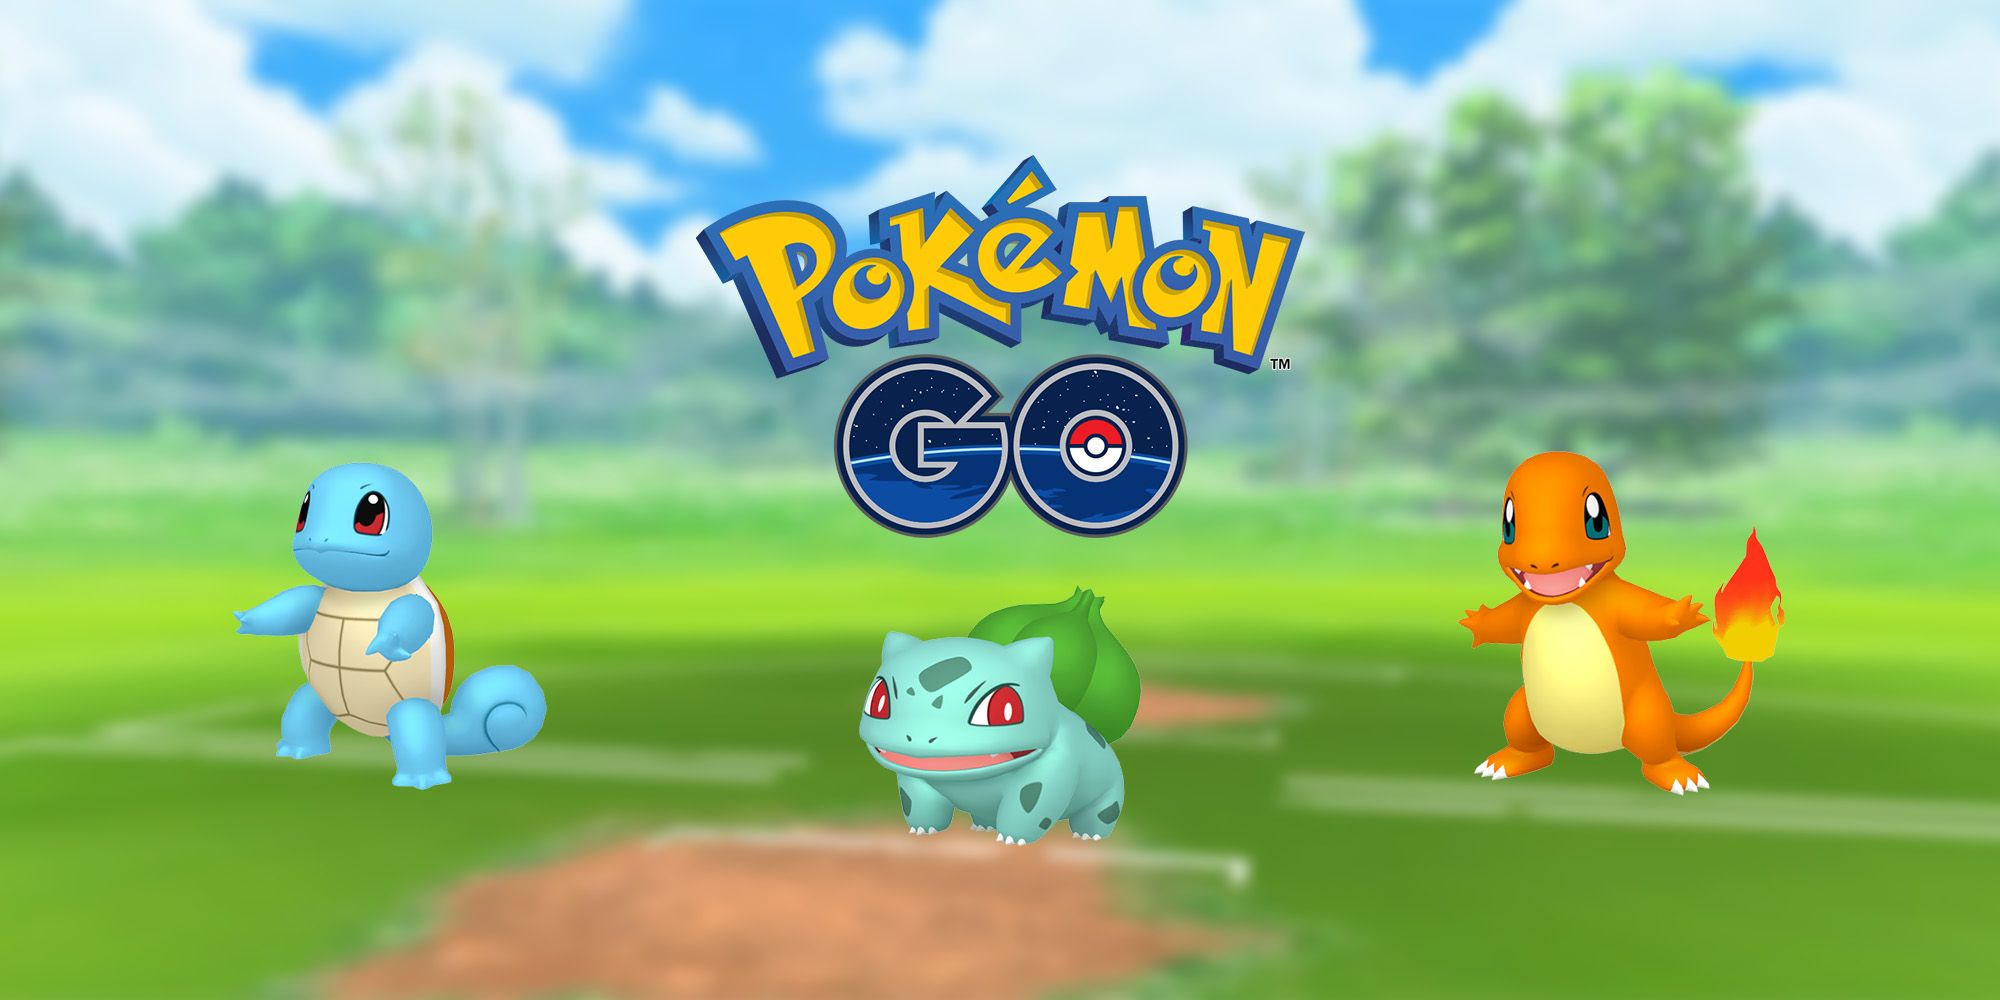 Retro Cup Header featuring Bulbasaur, Charmander, and Squirtle with the Pokemon Go logo.